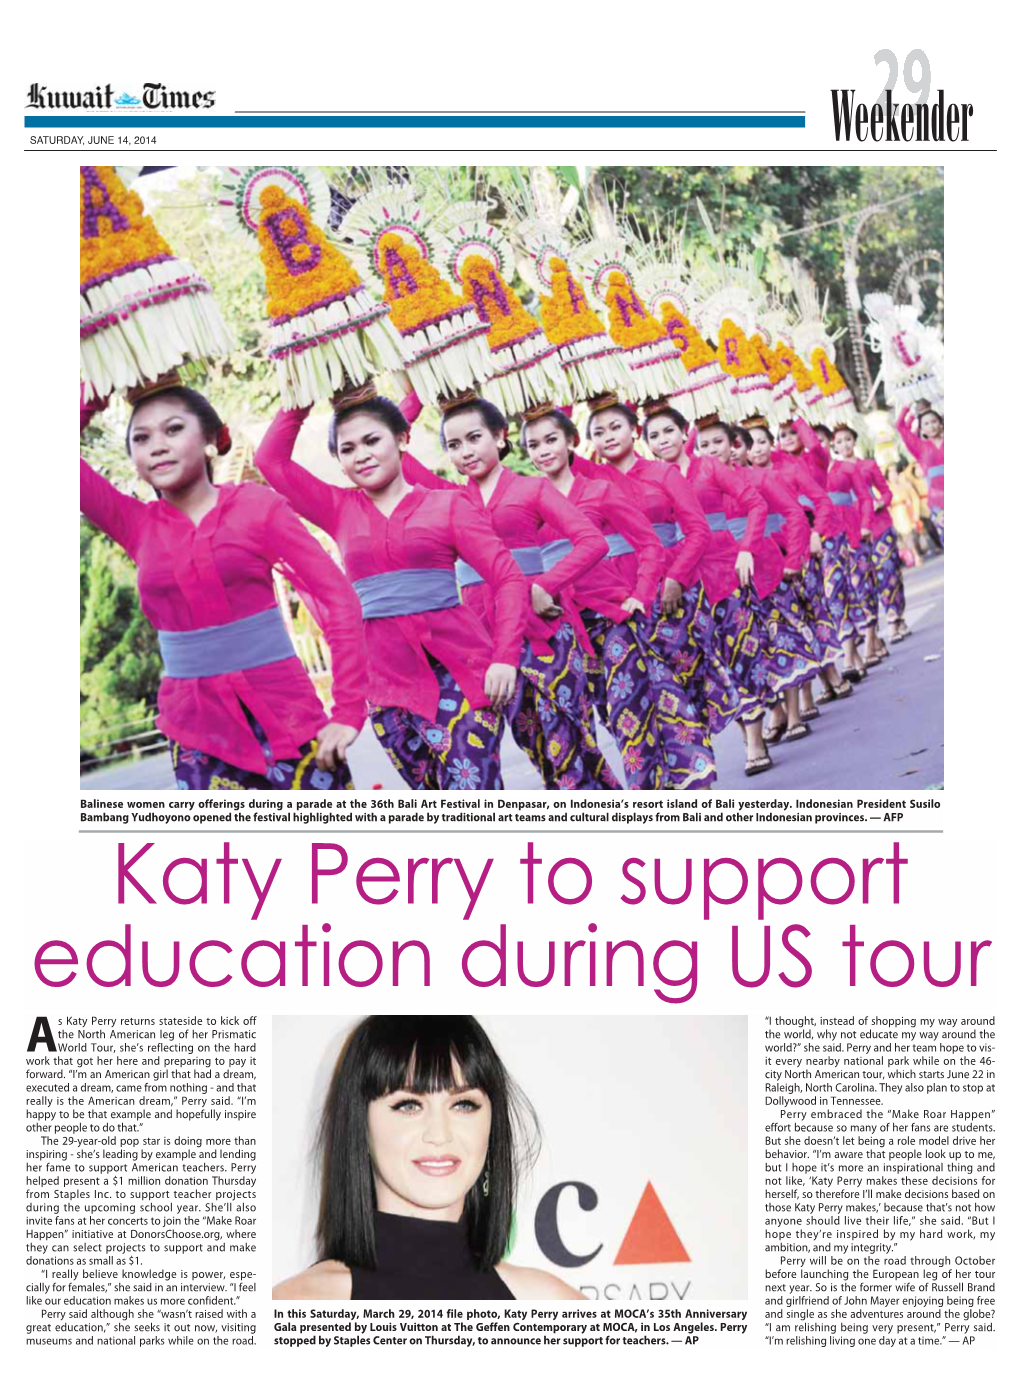 Katy Perry to Support Education During US Tour